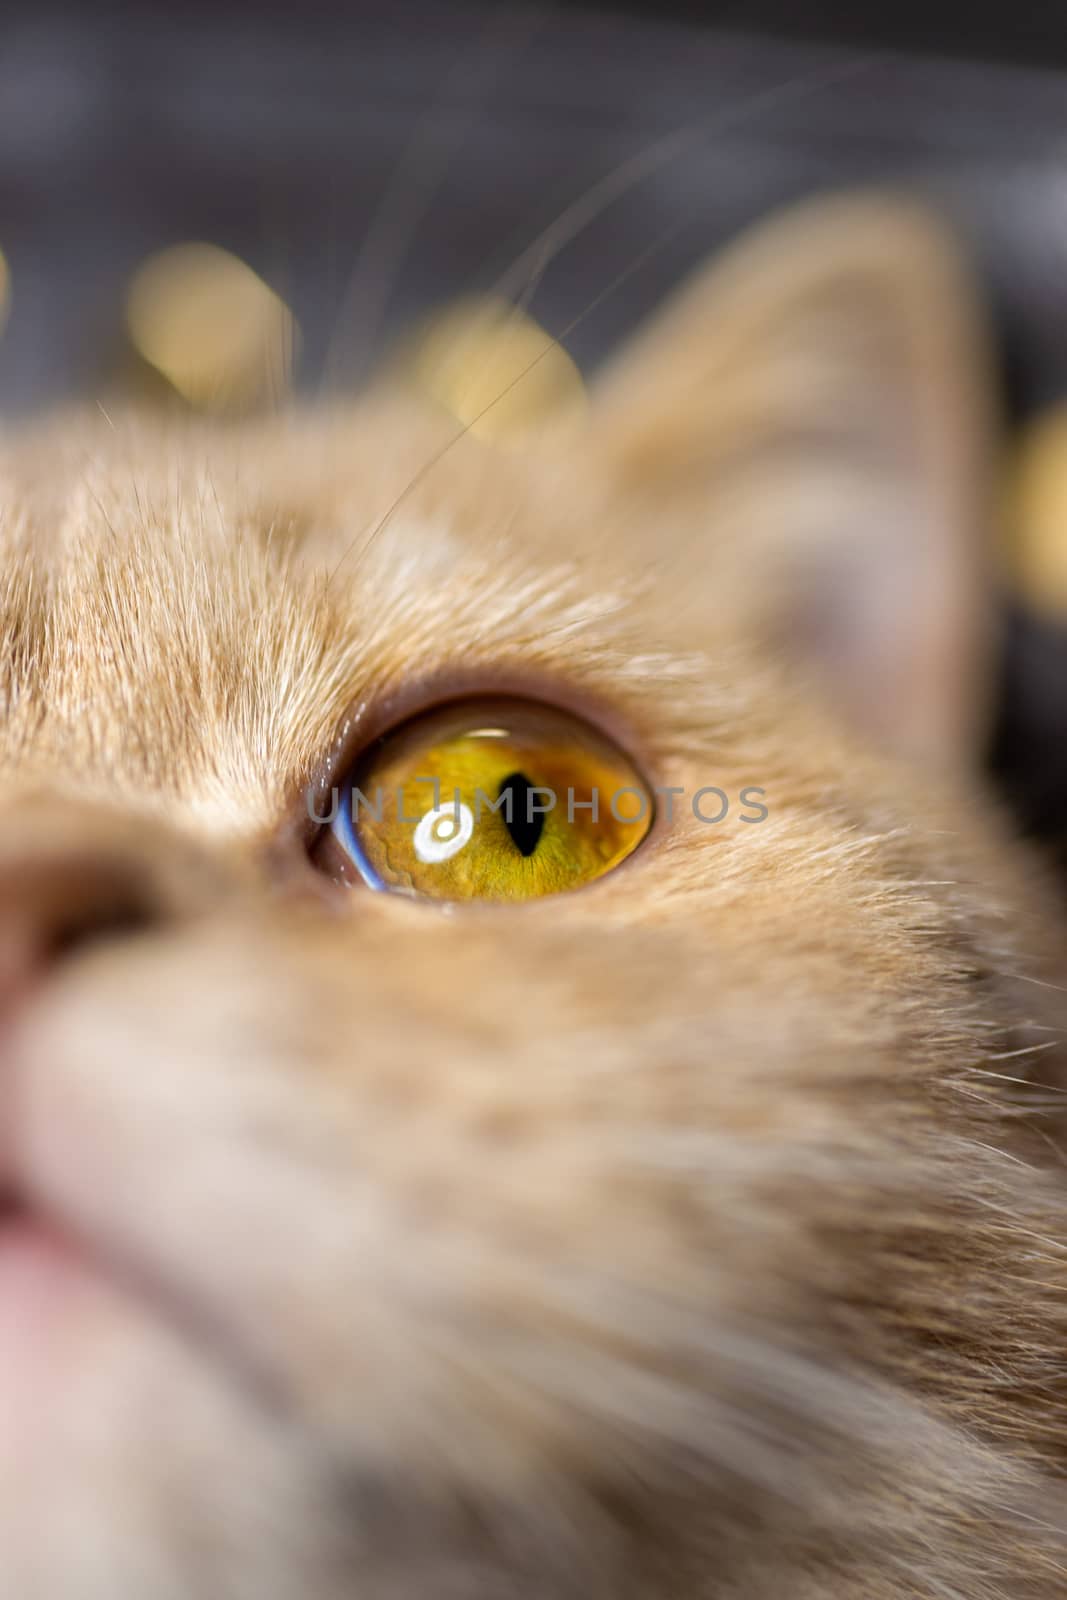 Temperamental british domestic cat looking up with one eye. Closeup view with blurred background.